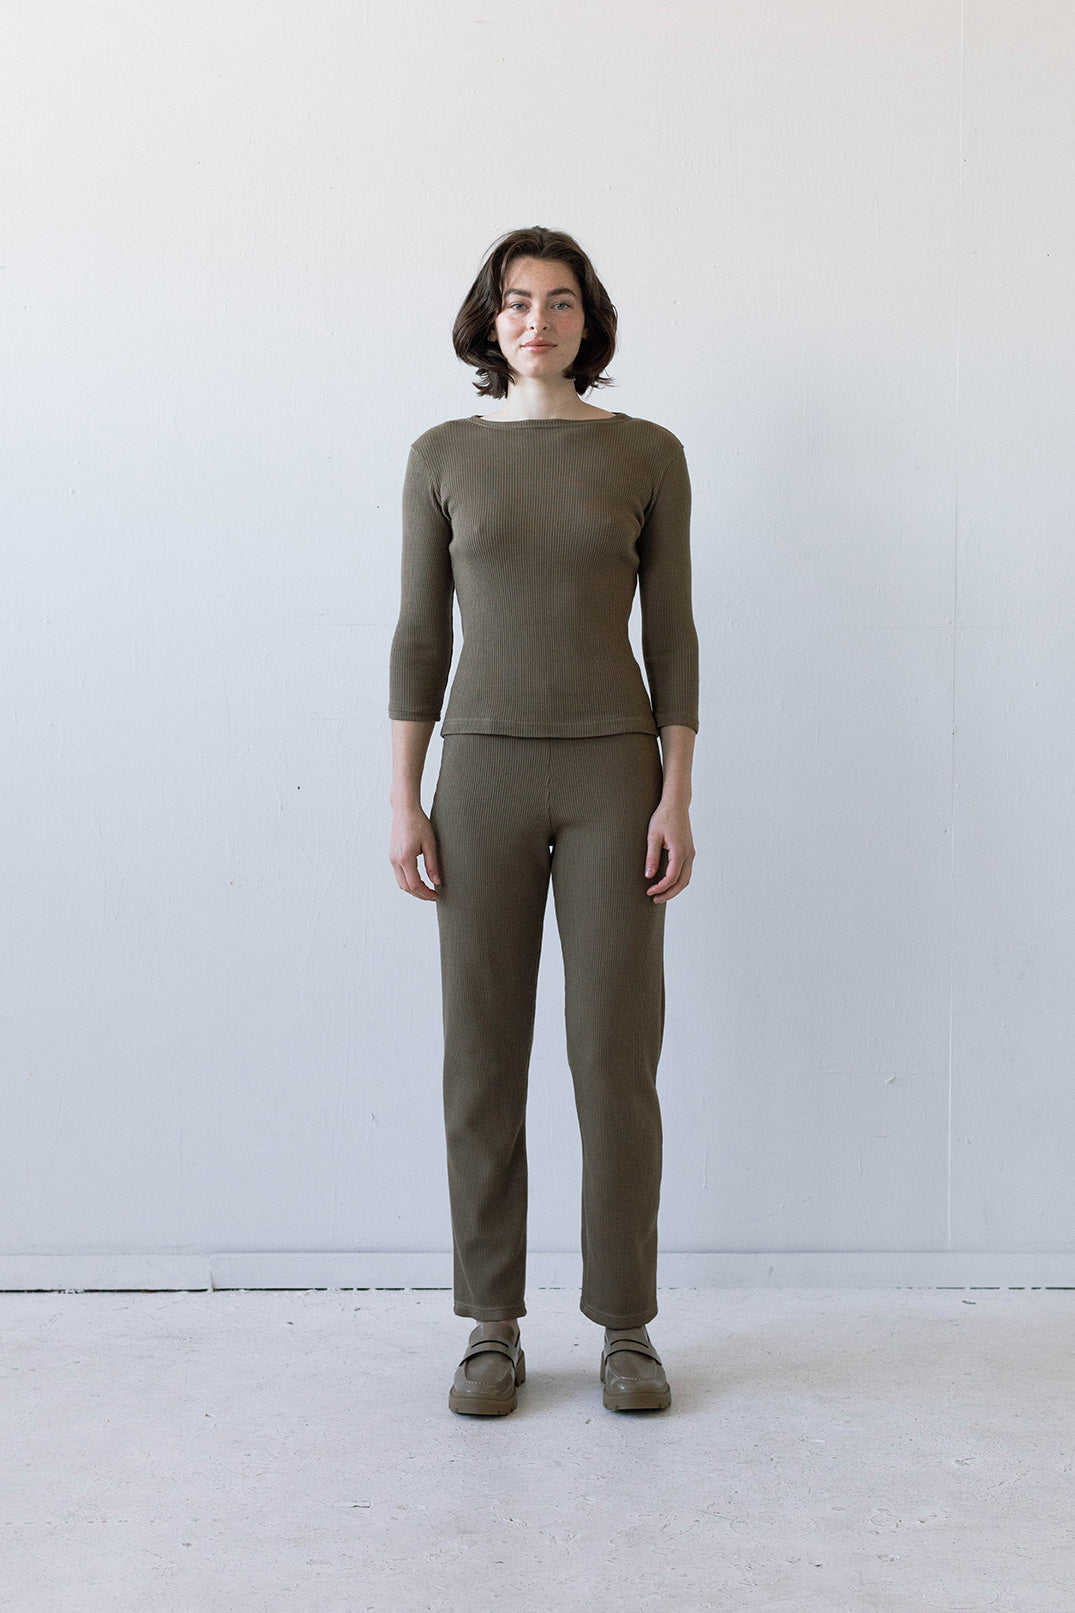 SAMPLE SALE - Elio Lounge Pant in Camel Rib Knit - SMALL/STANDARD